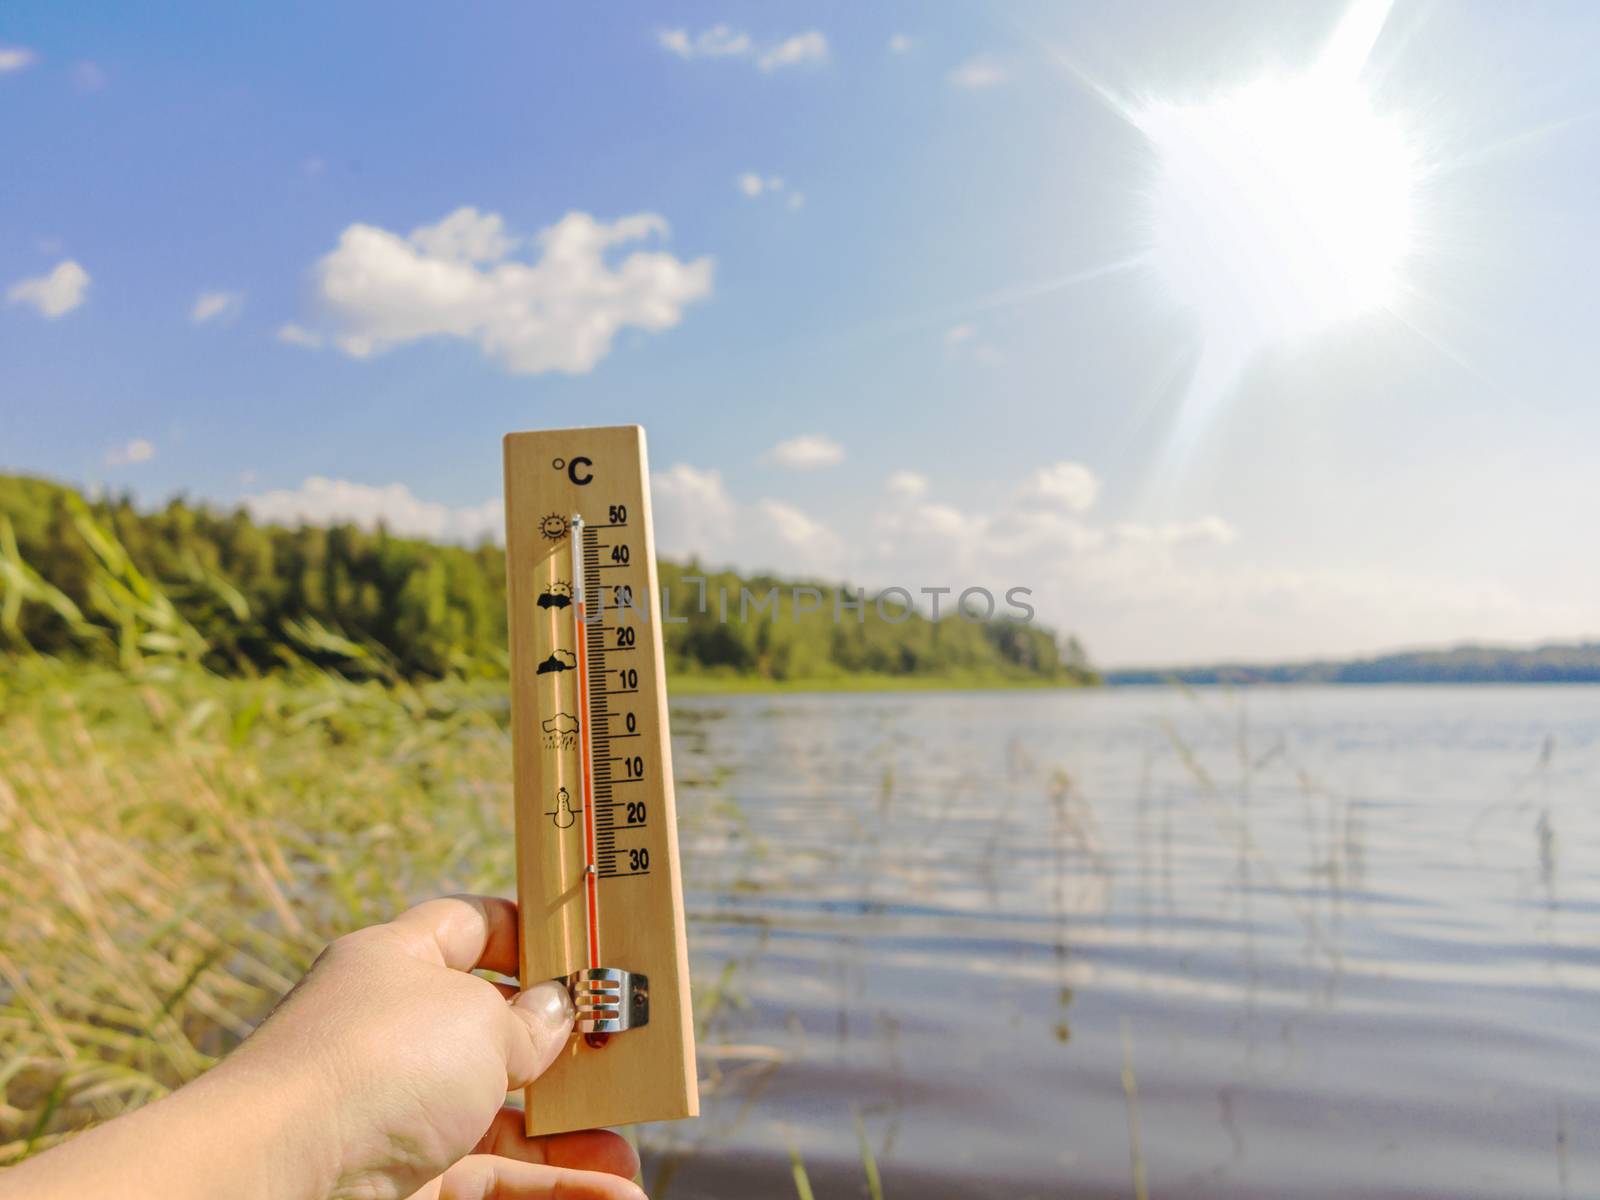 Thermometer showing 30 degrees Celsius of heat against the background of the lake water and the blue sky in sunlight by galsand